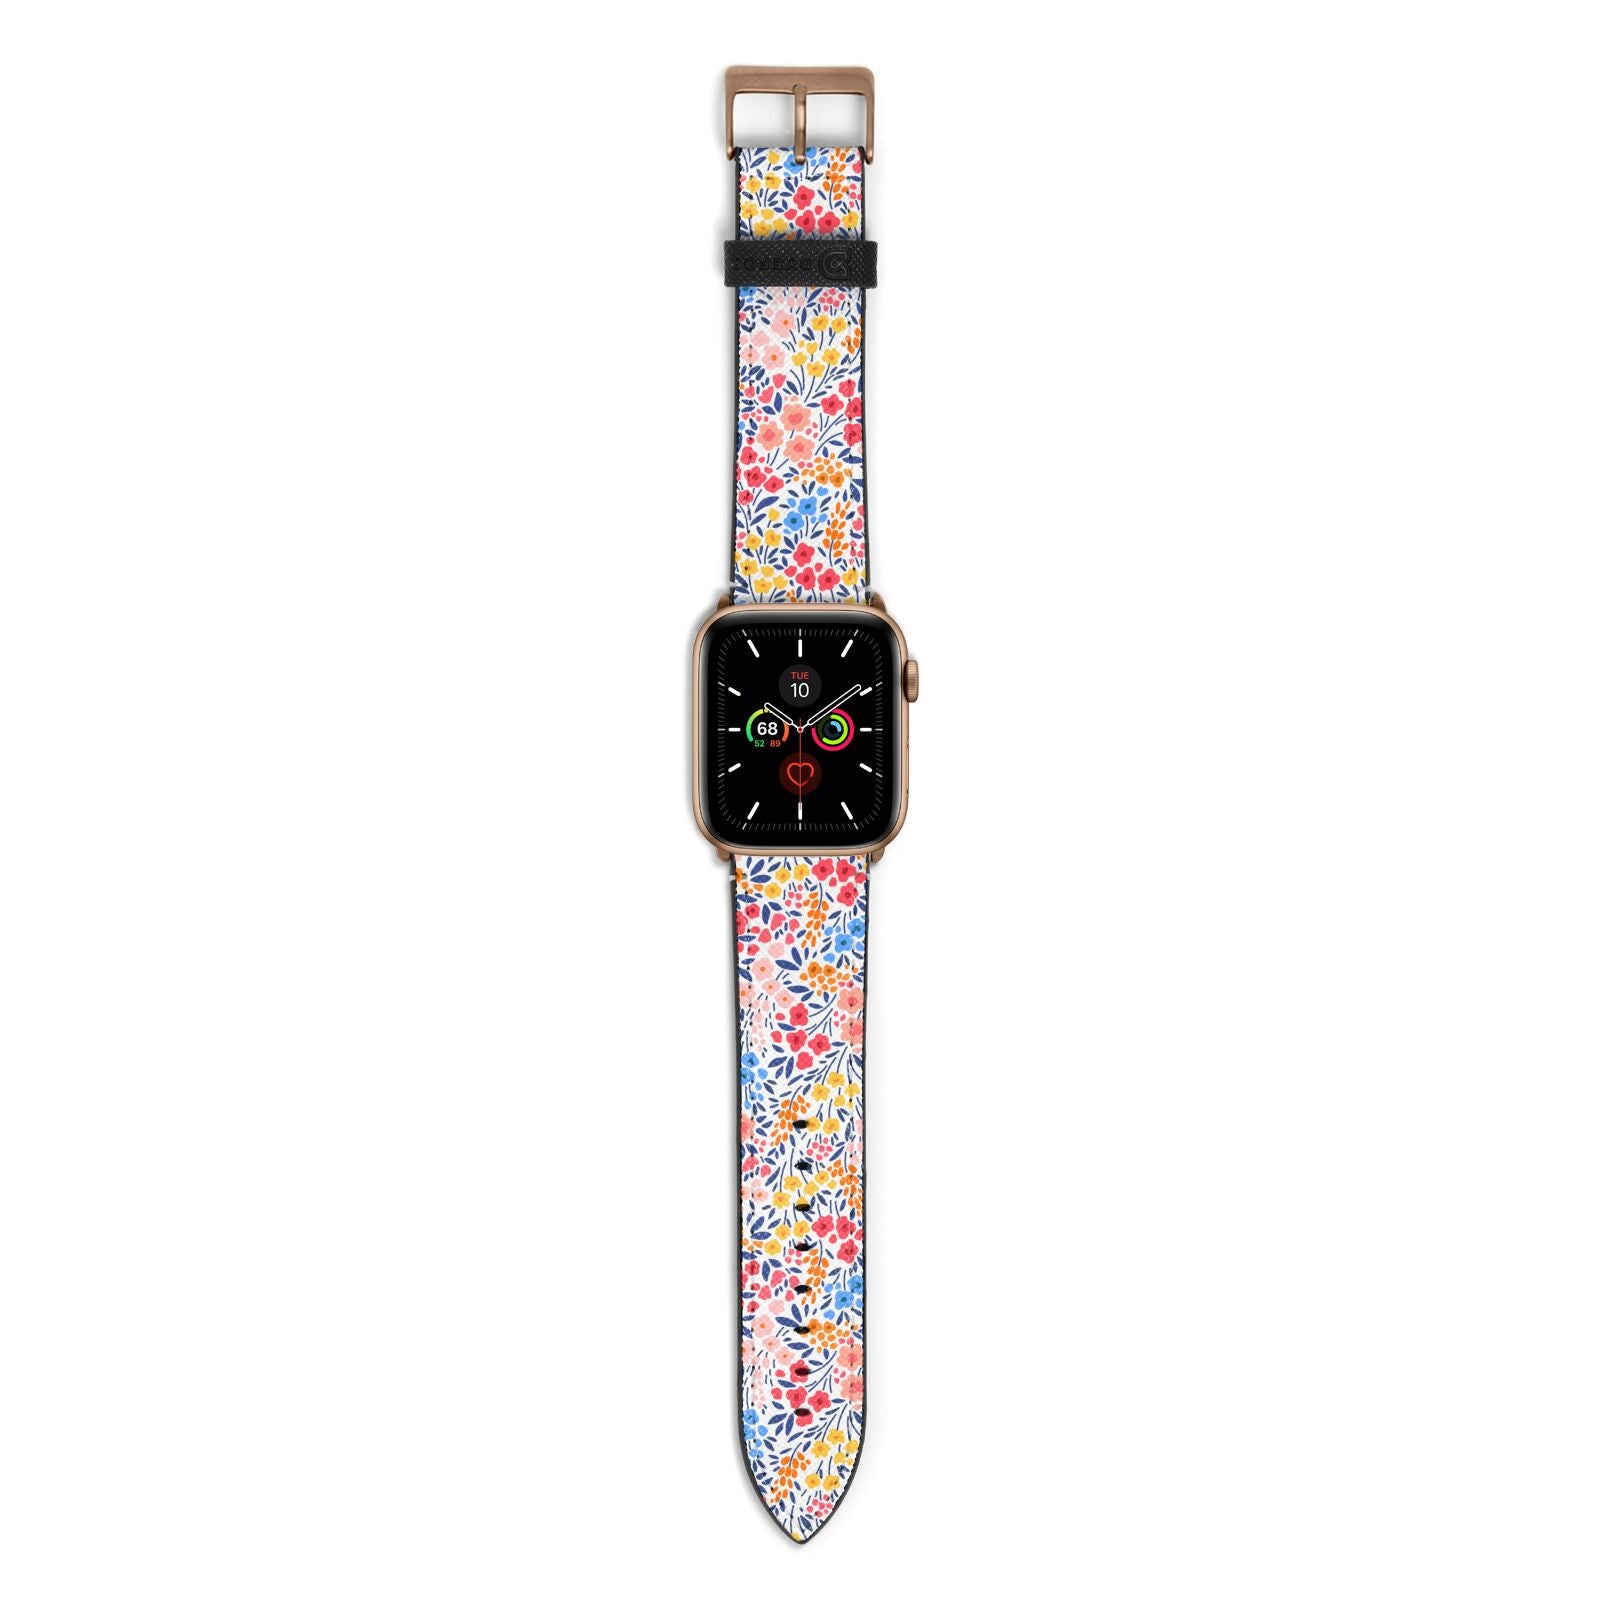 Small Flowers Apple Watch Strap with Gold Hardware